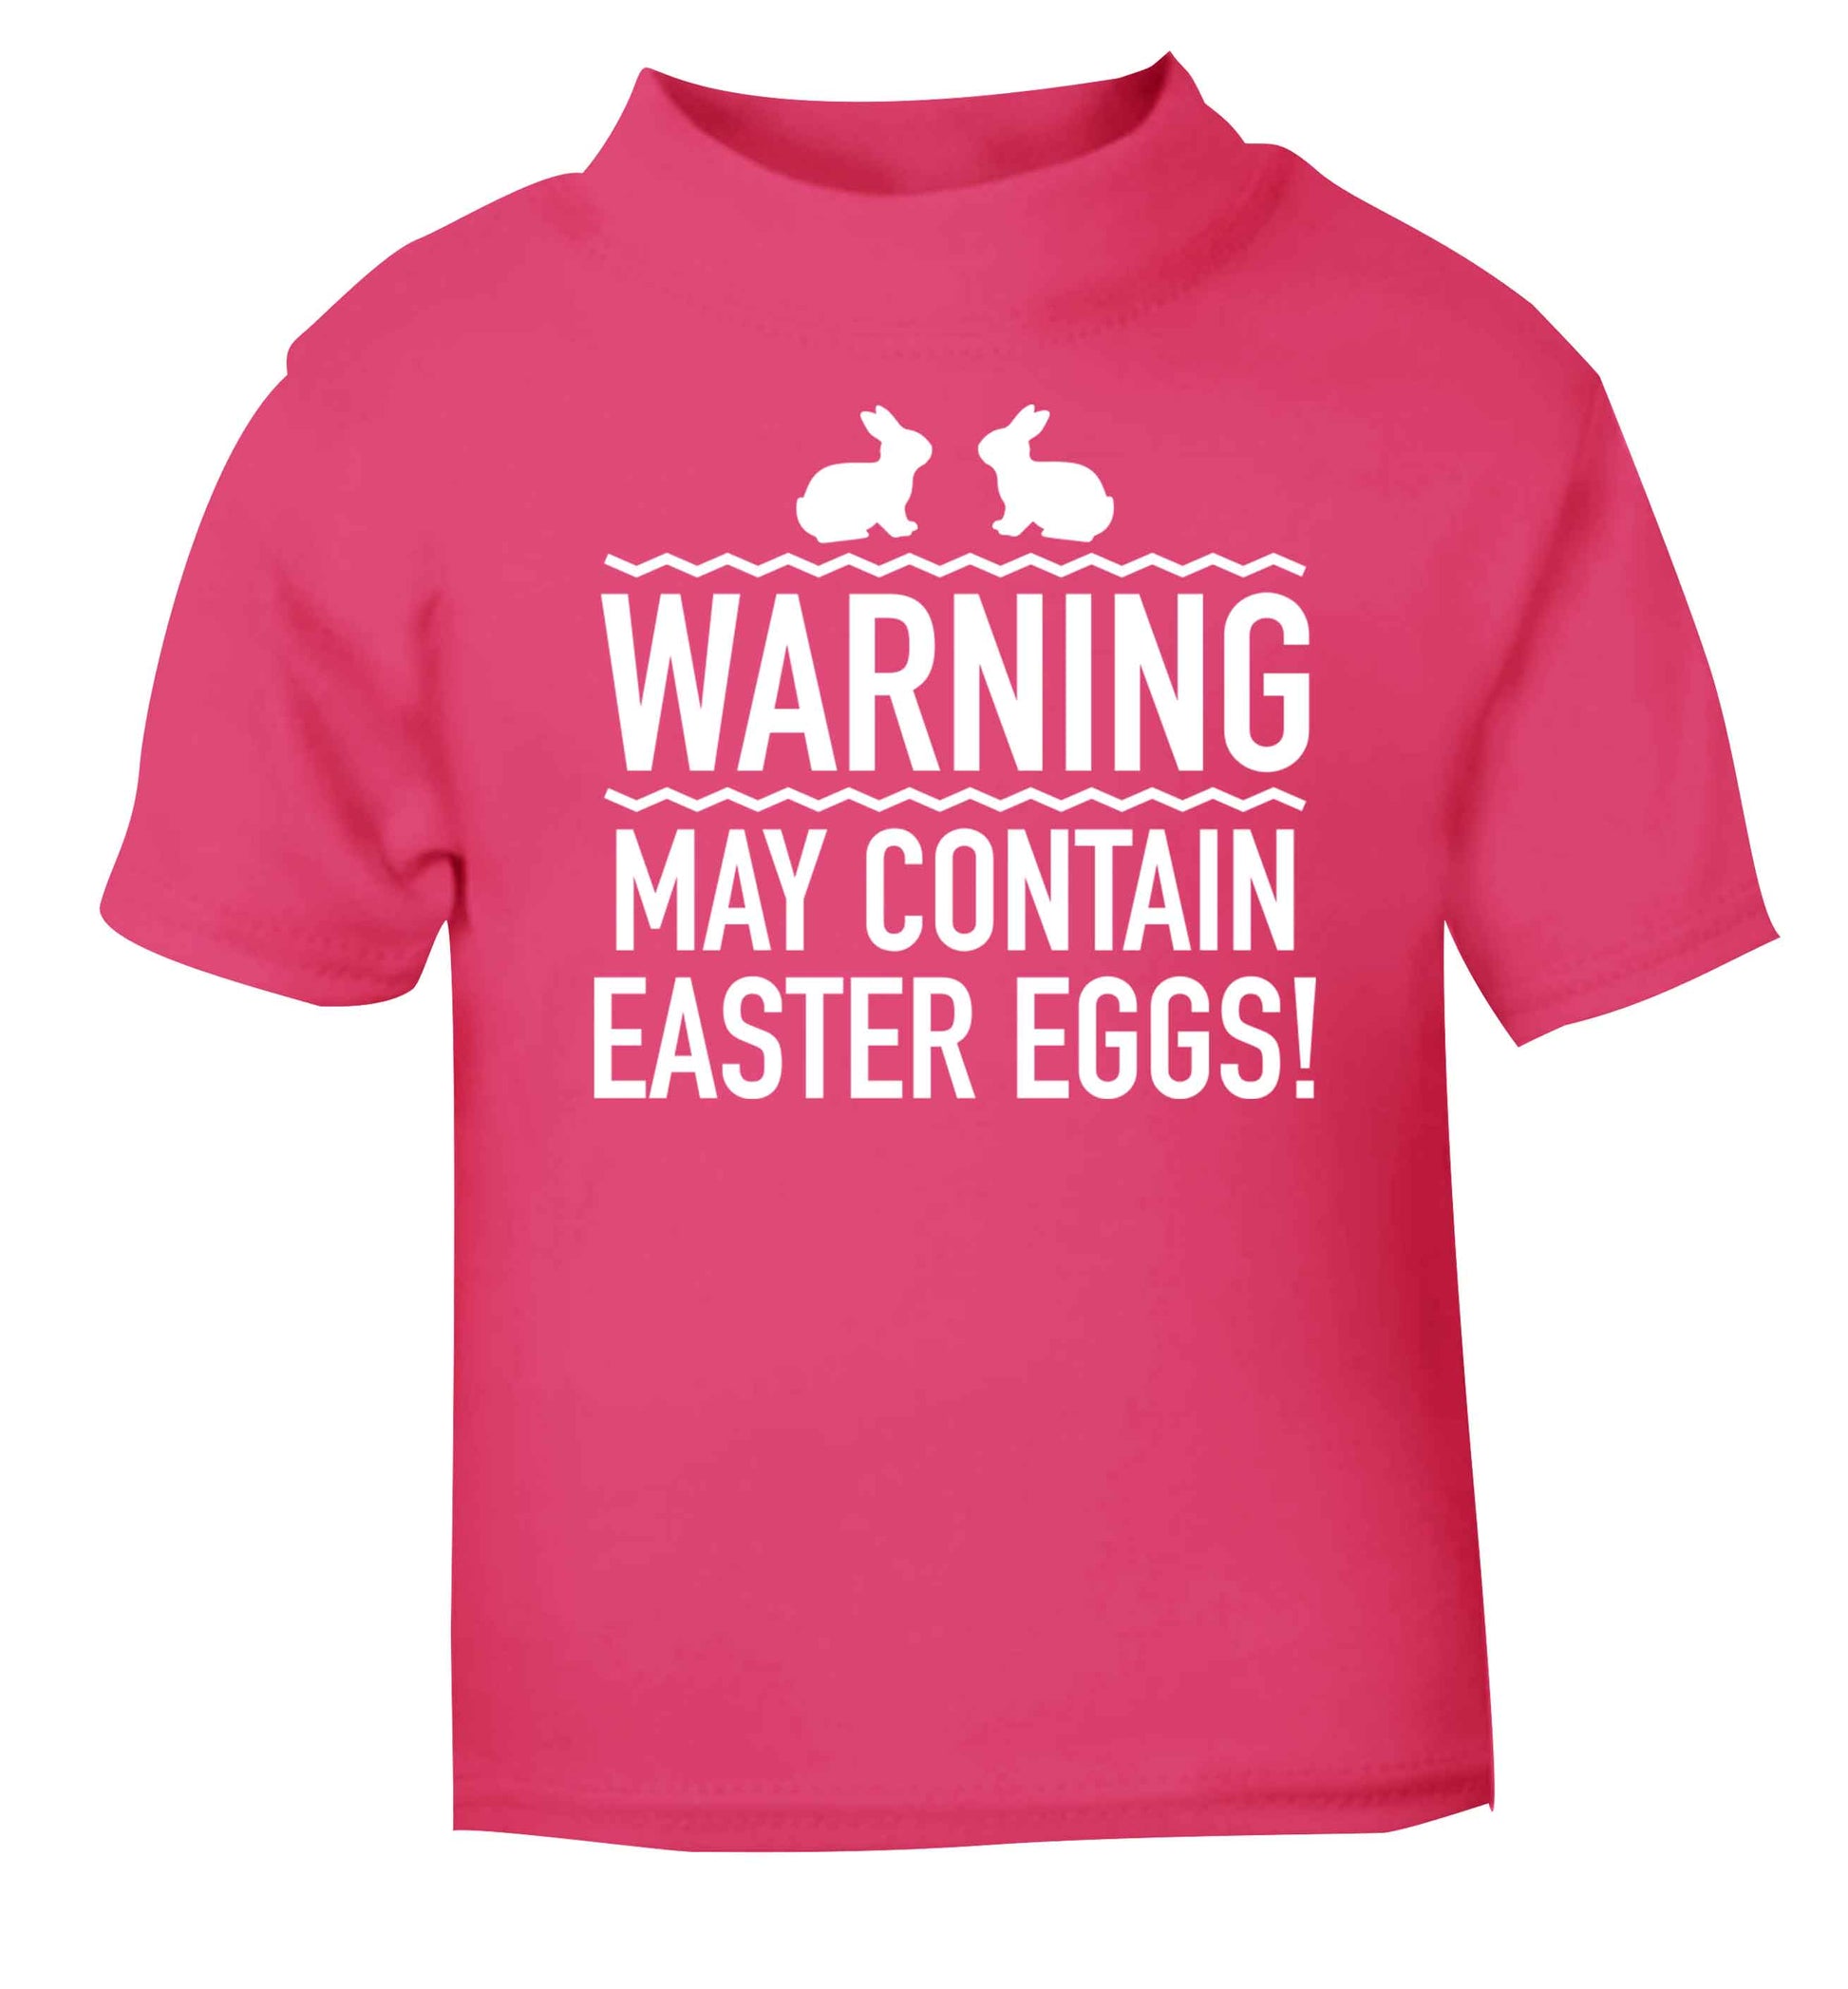 Warning may contain Easter eggs pink baby toddler Tshirt 2 Years